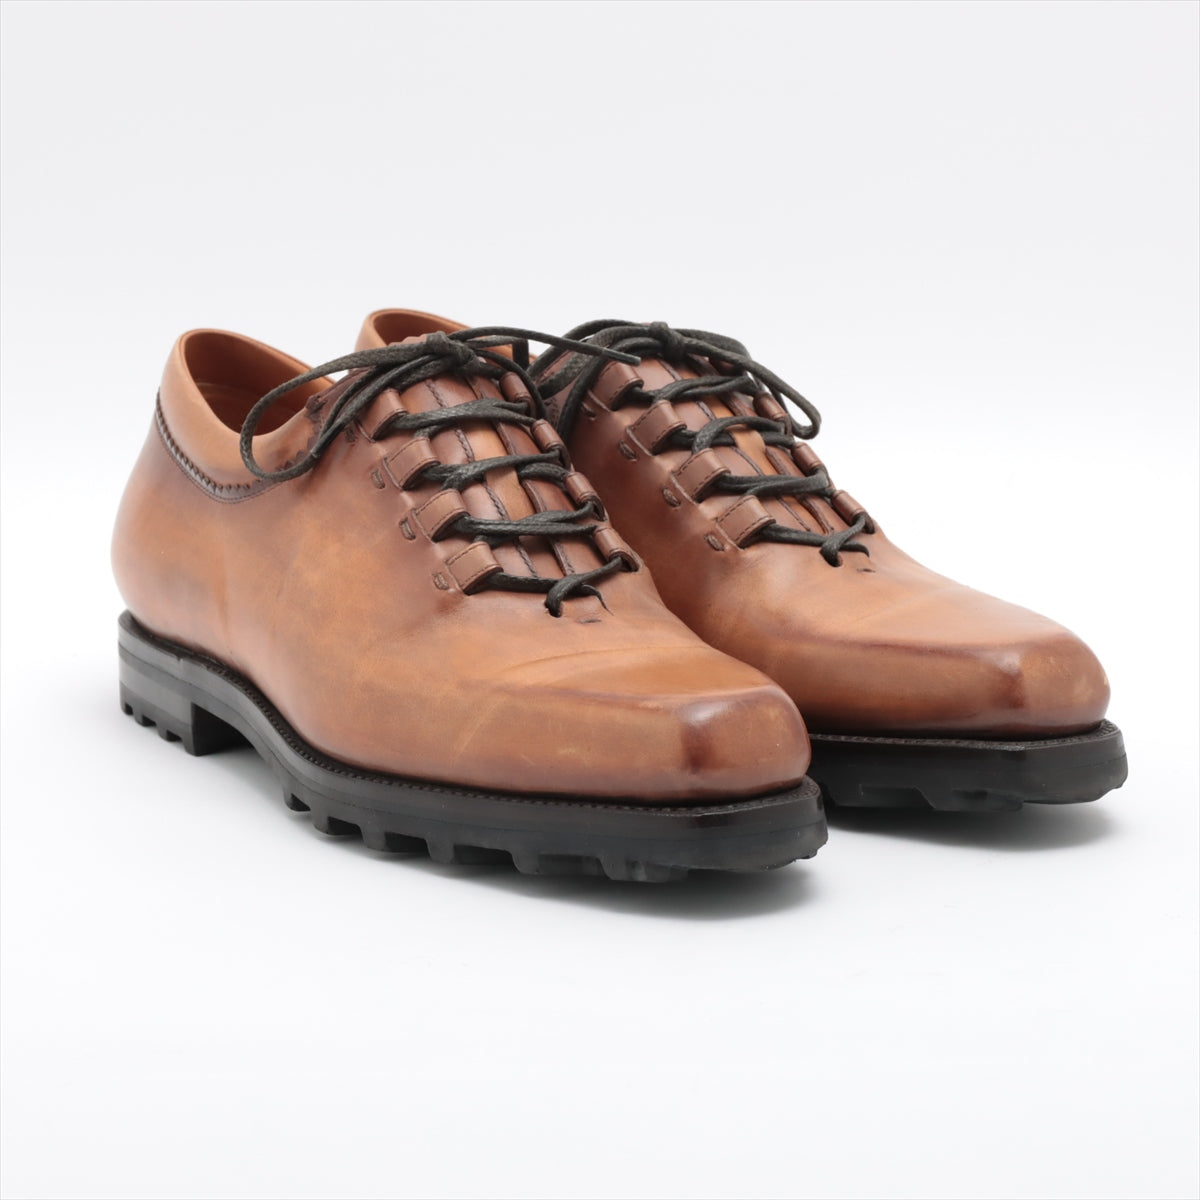 Berluti Leather Leather shoes 9 Men's Camel 0135 Genuine shoe tree available